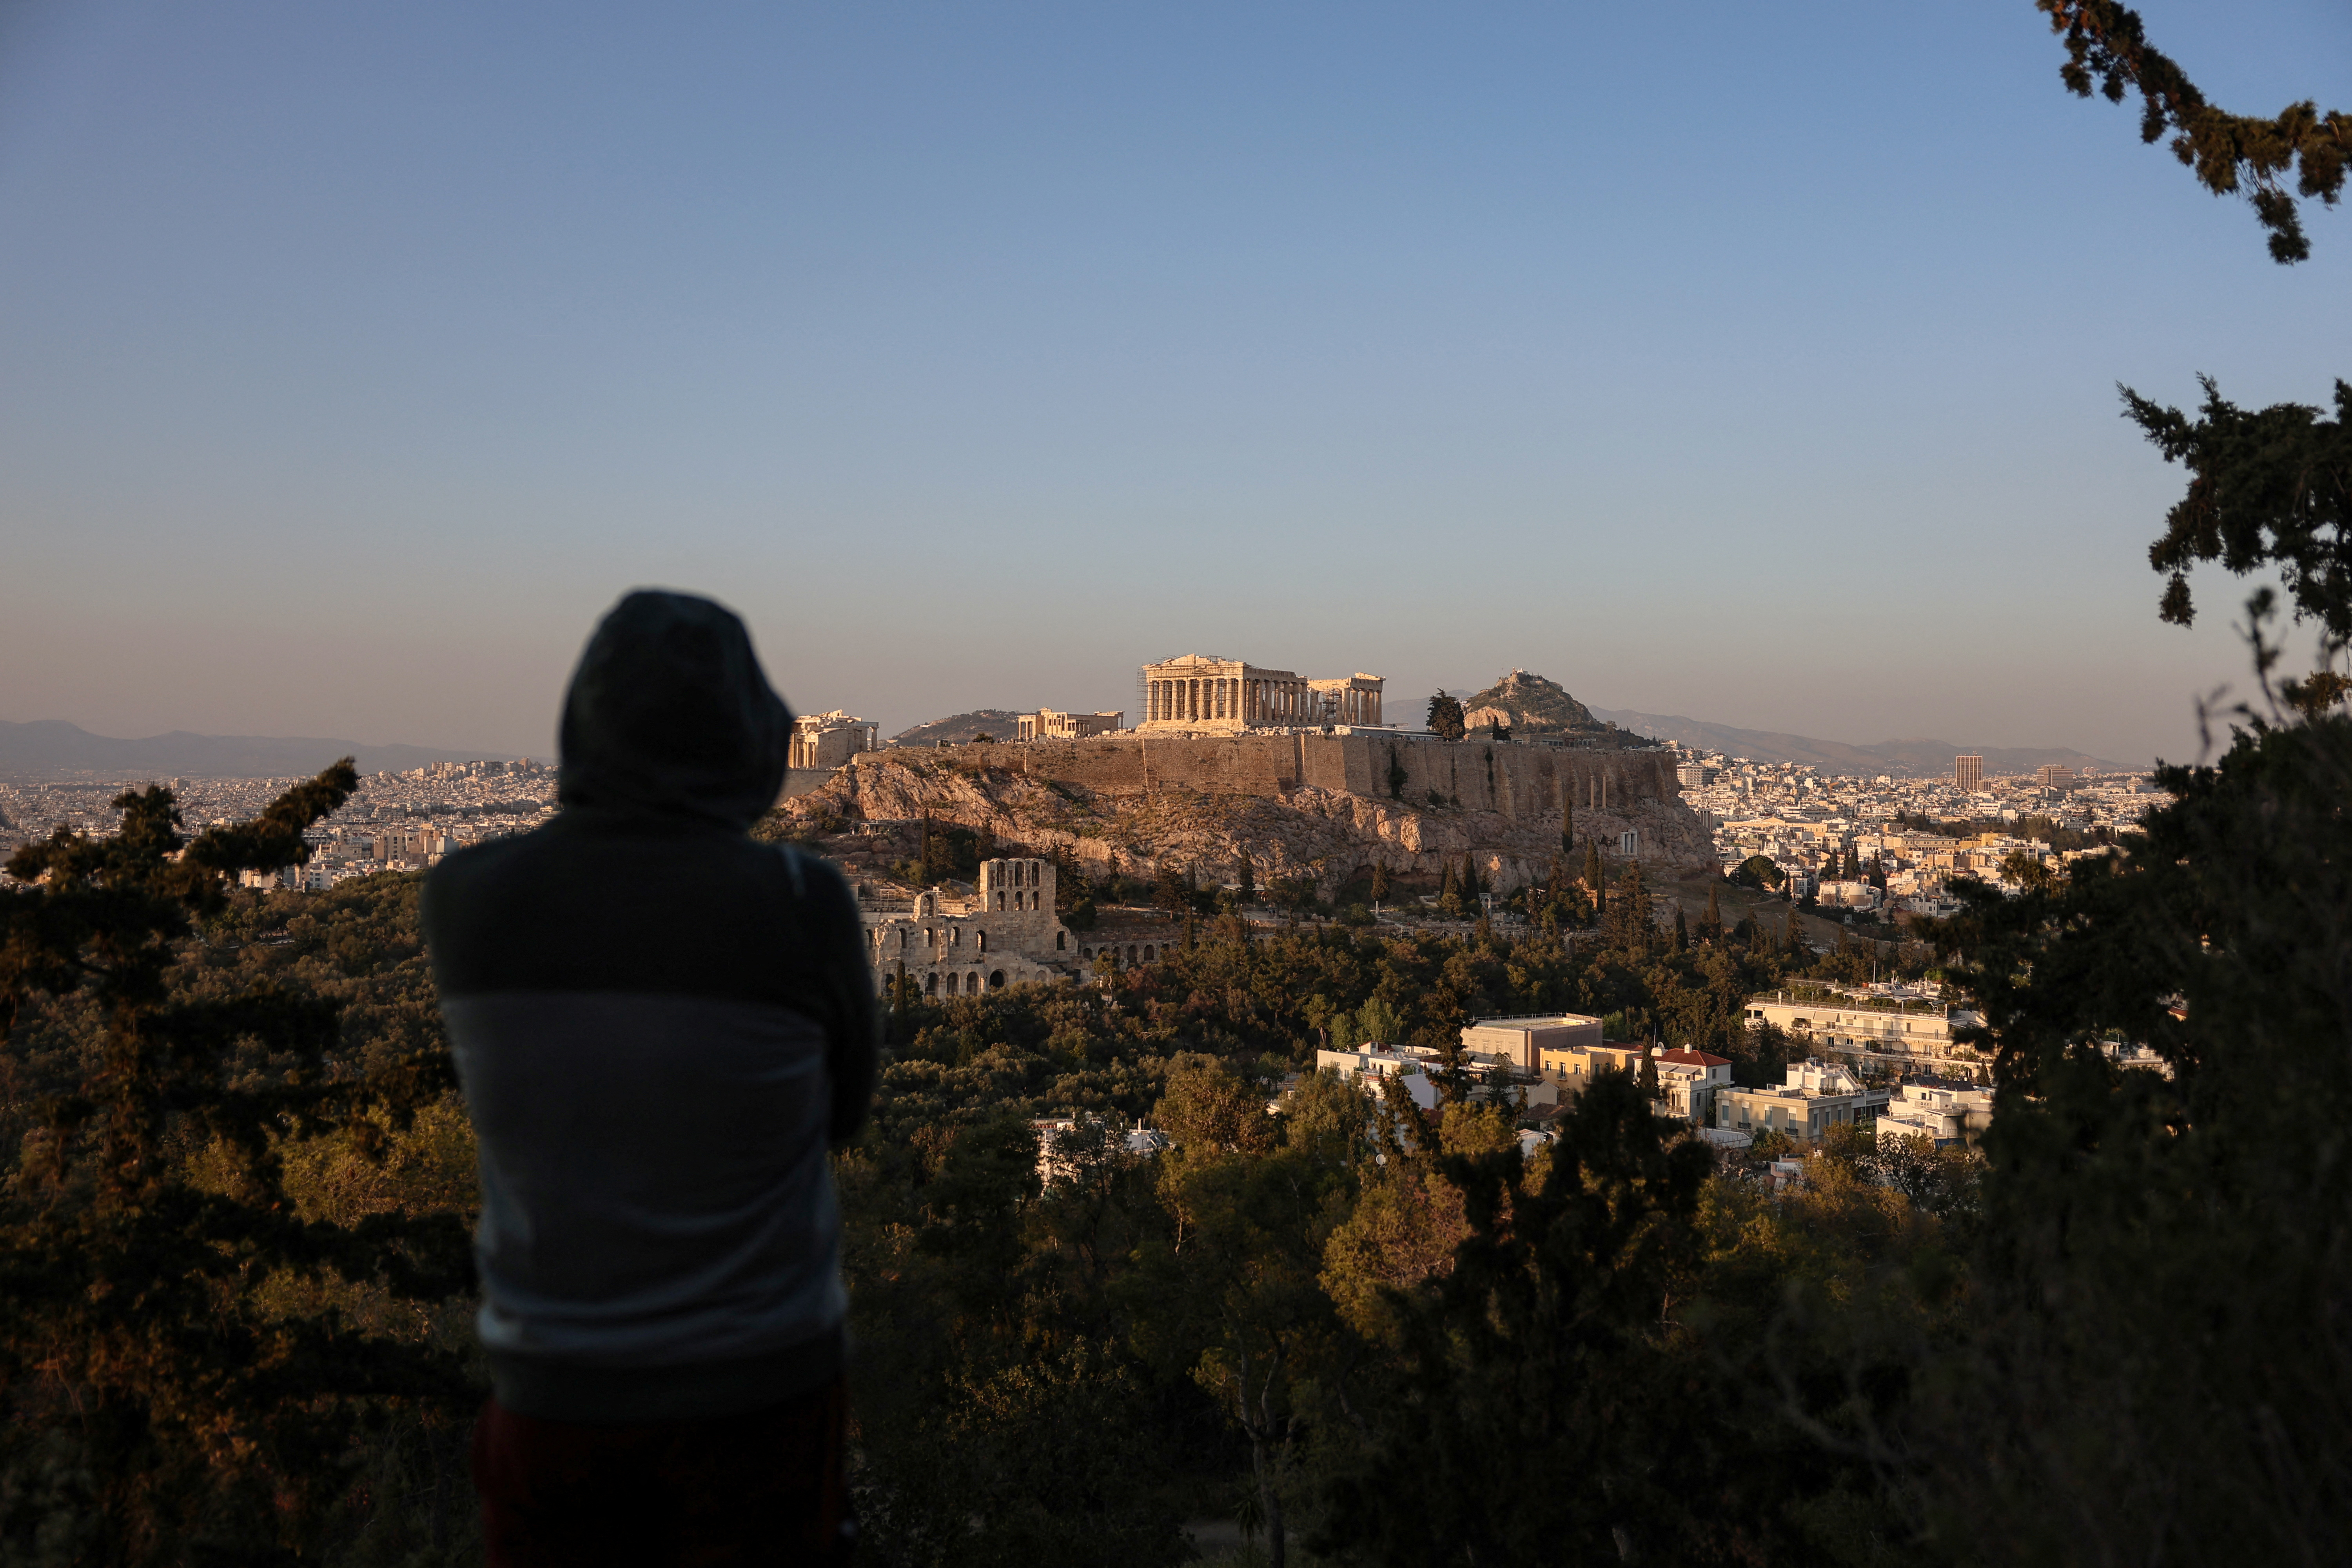 Greece finally rebounds from crisis - on paper, at least